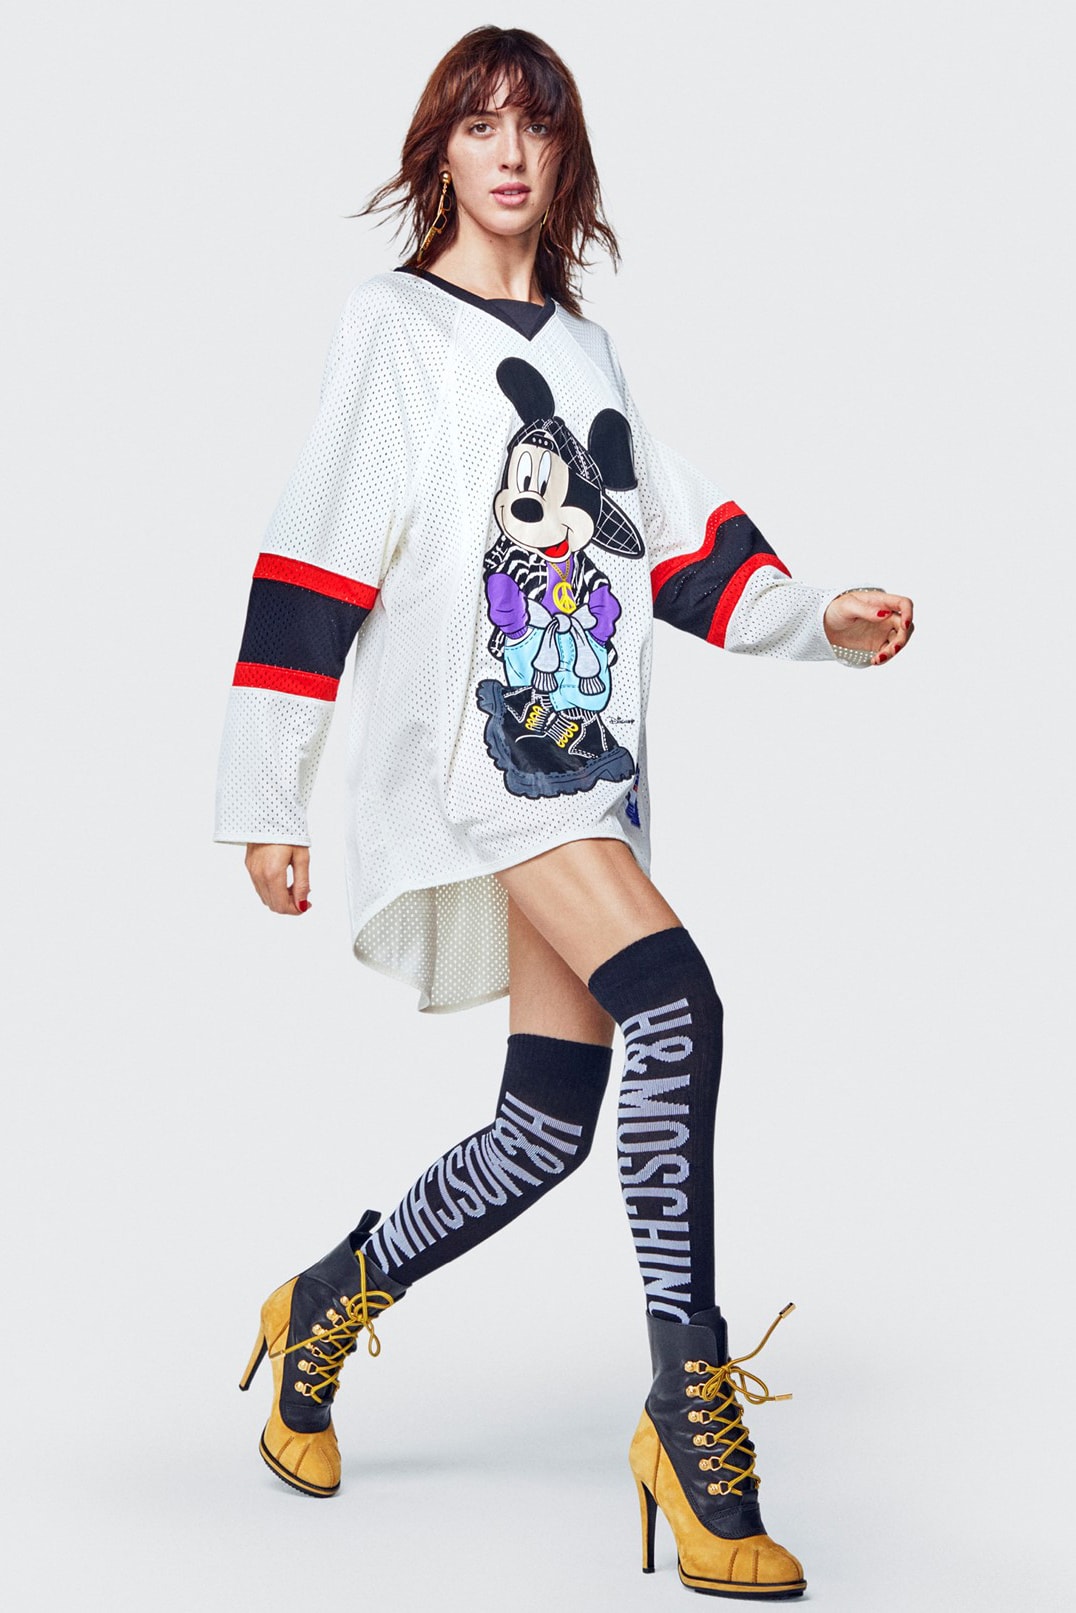 Moschino H&M Collection Lookbook Jersey White Boots Tan